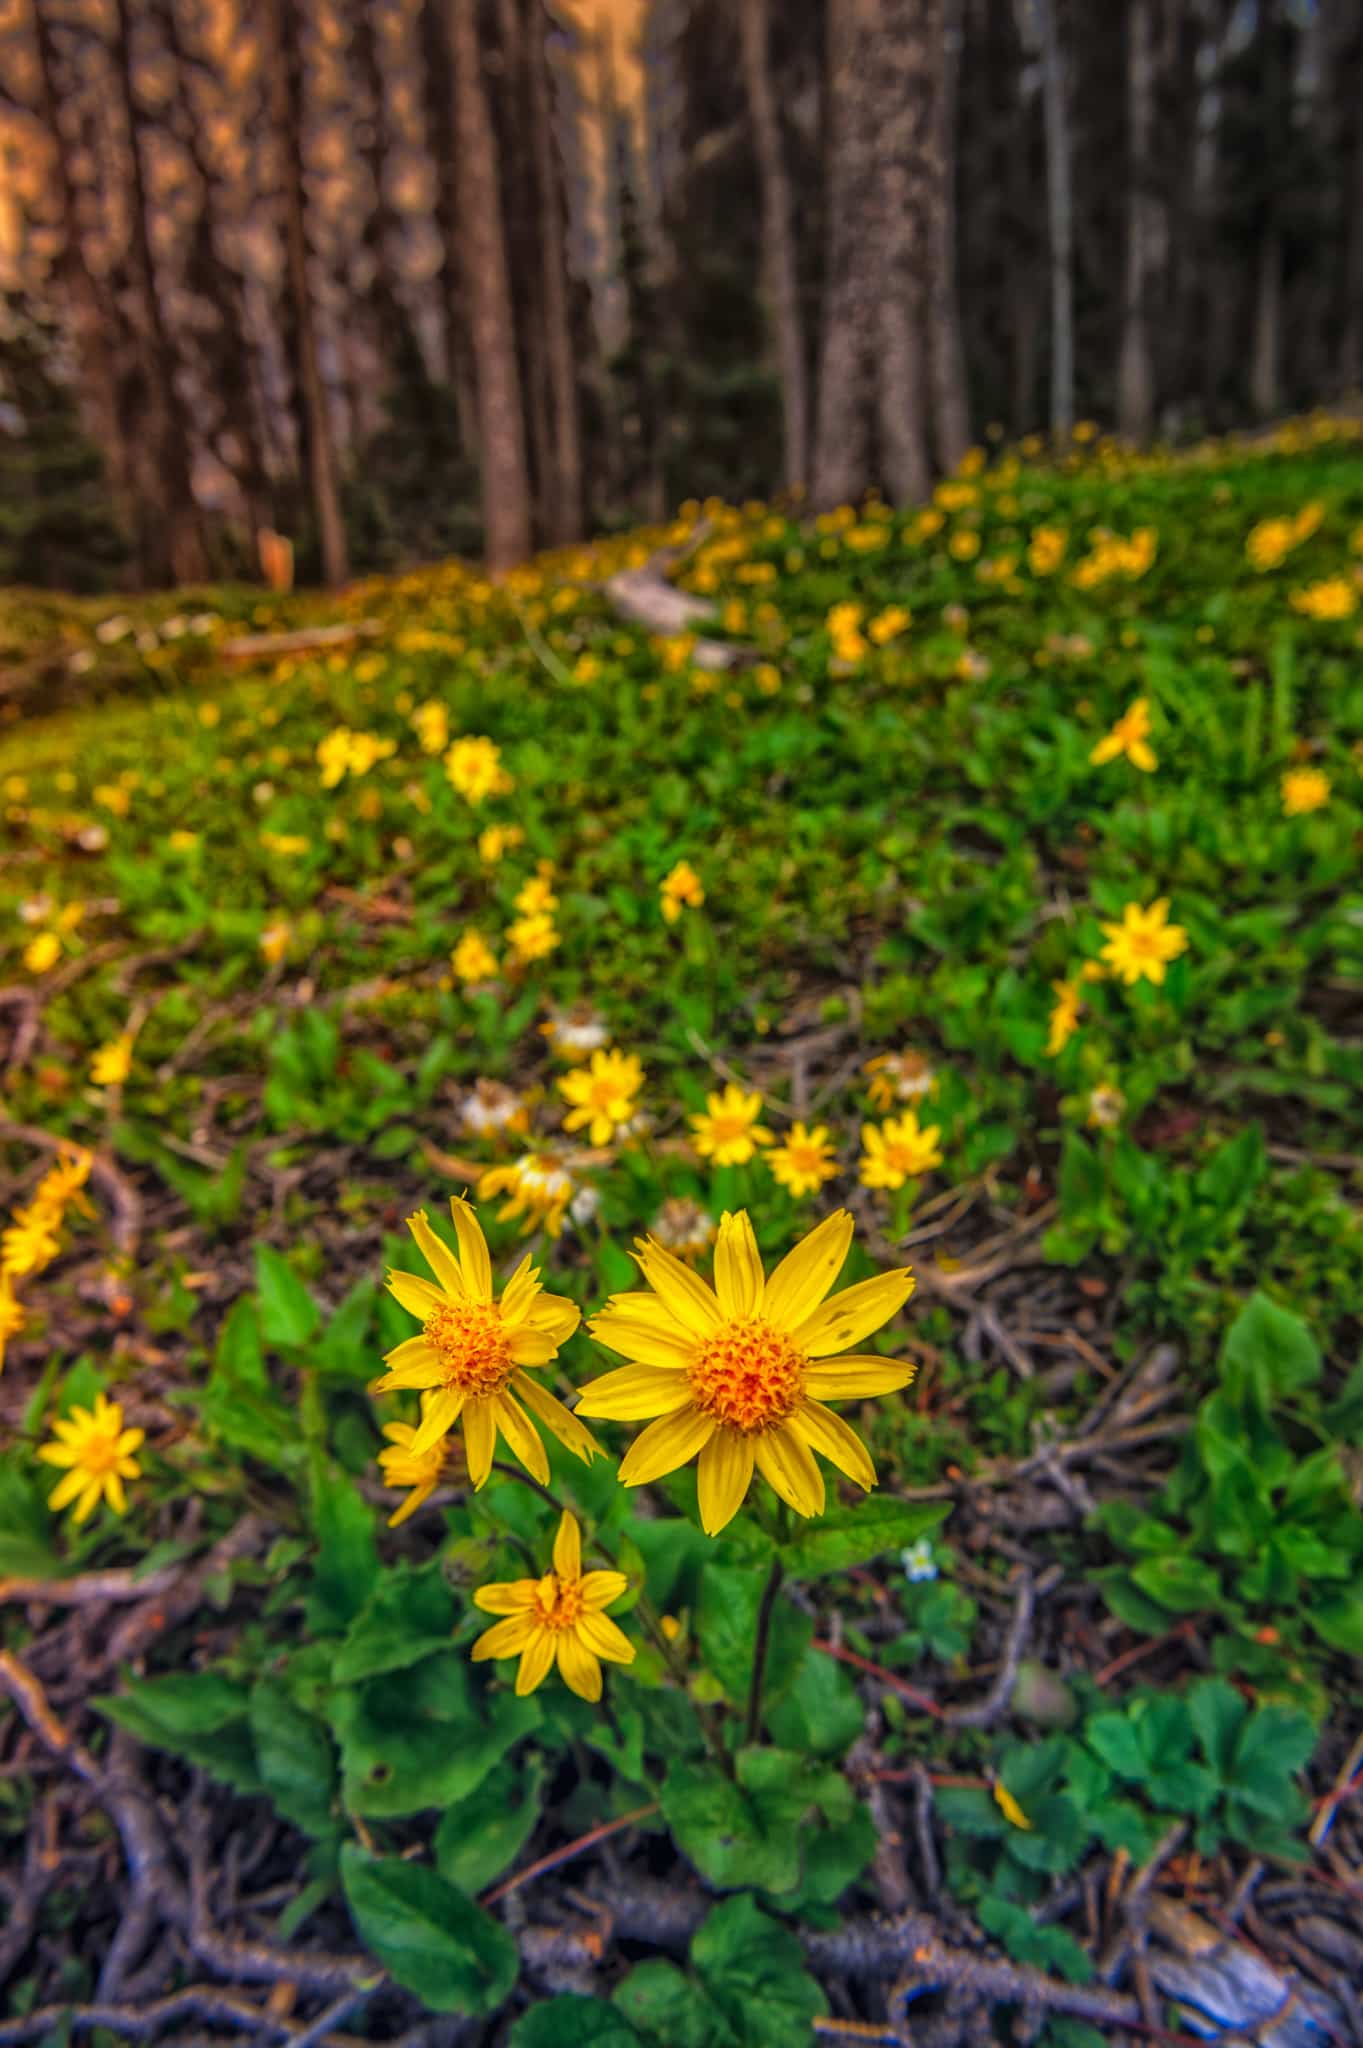 This Heart-Leaf Arnica is growing along CO 149 near Slumgullion Pass. Due to the Spruce Bark Beetle infestation, wide swaths of forest on either side of the road have been cleared, creating an ideal environment for wildflowers.